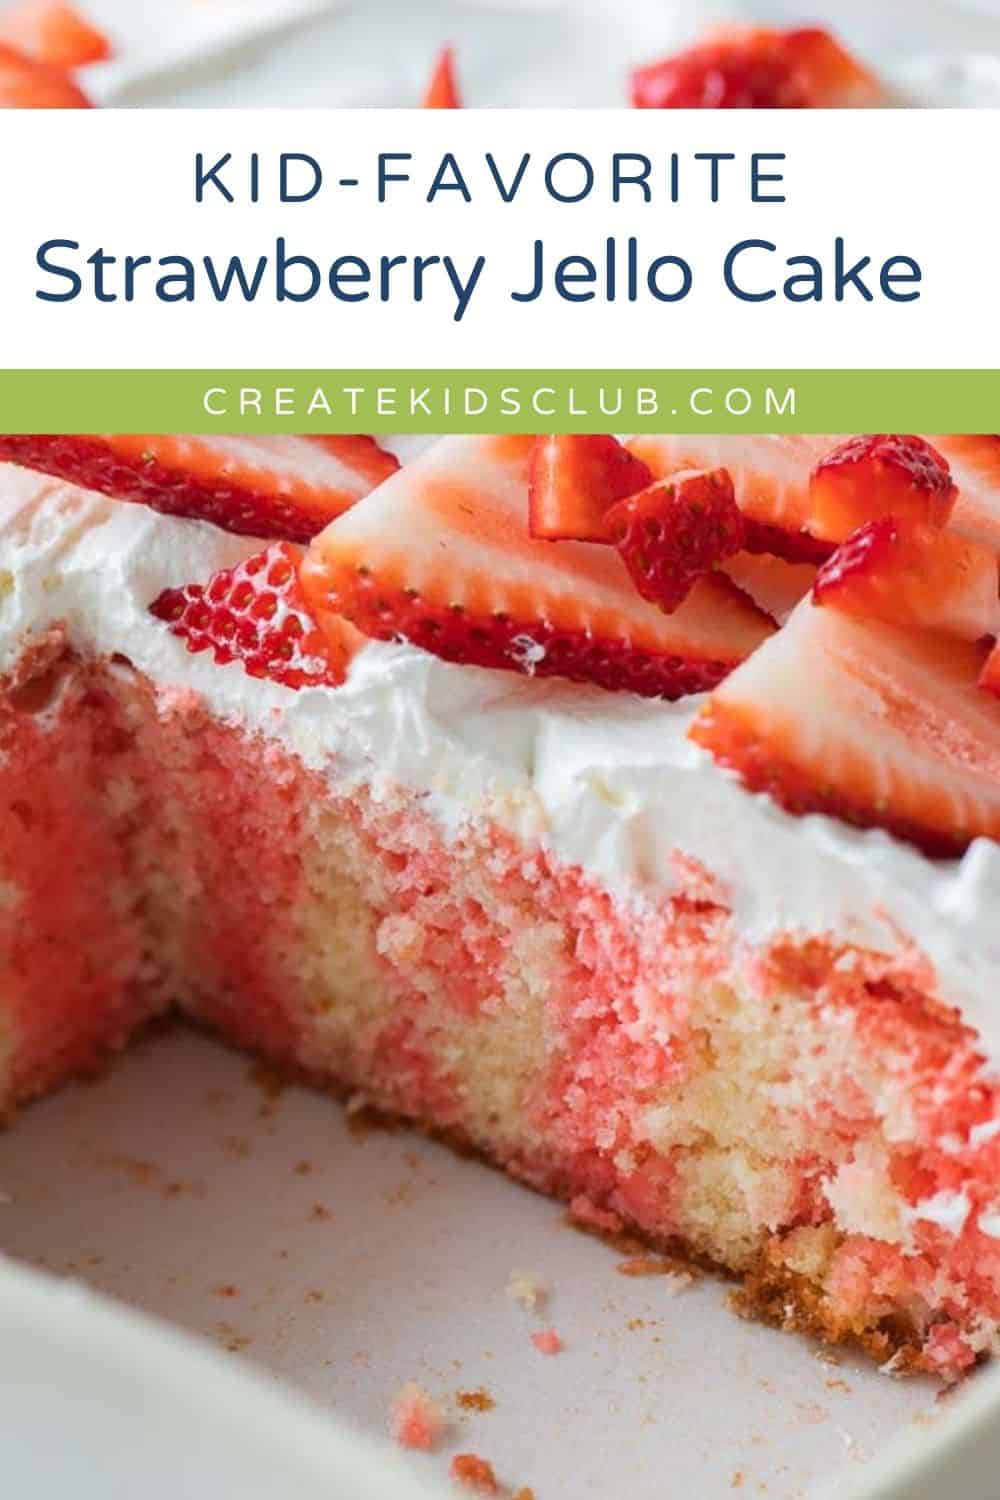 Pin of strawberry jello cake shown with a slice removed